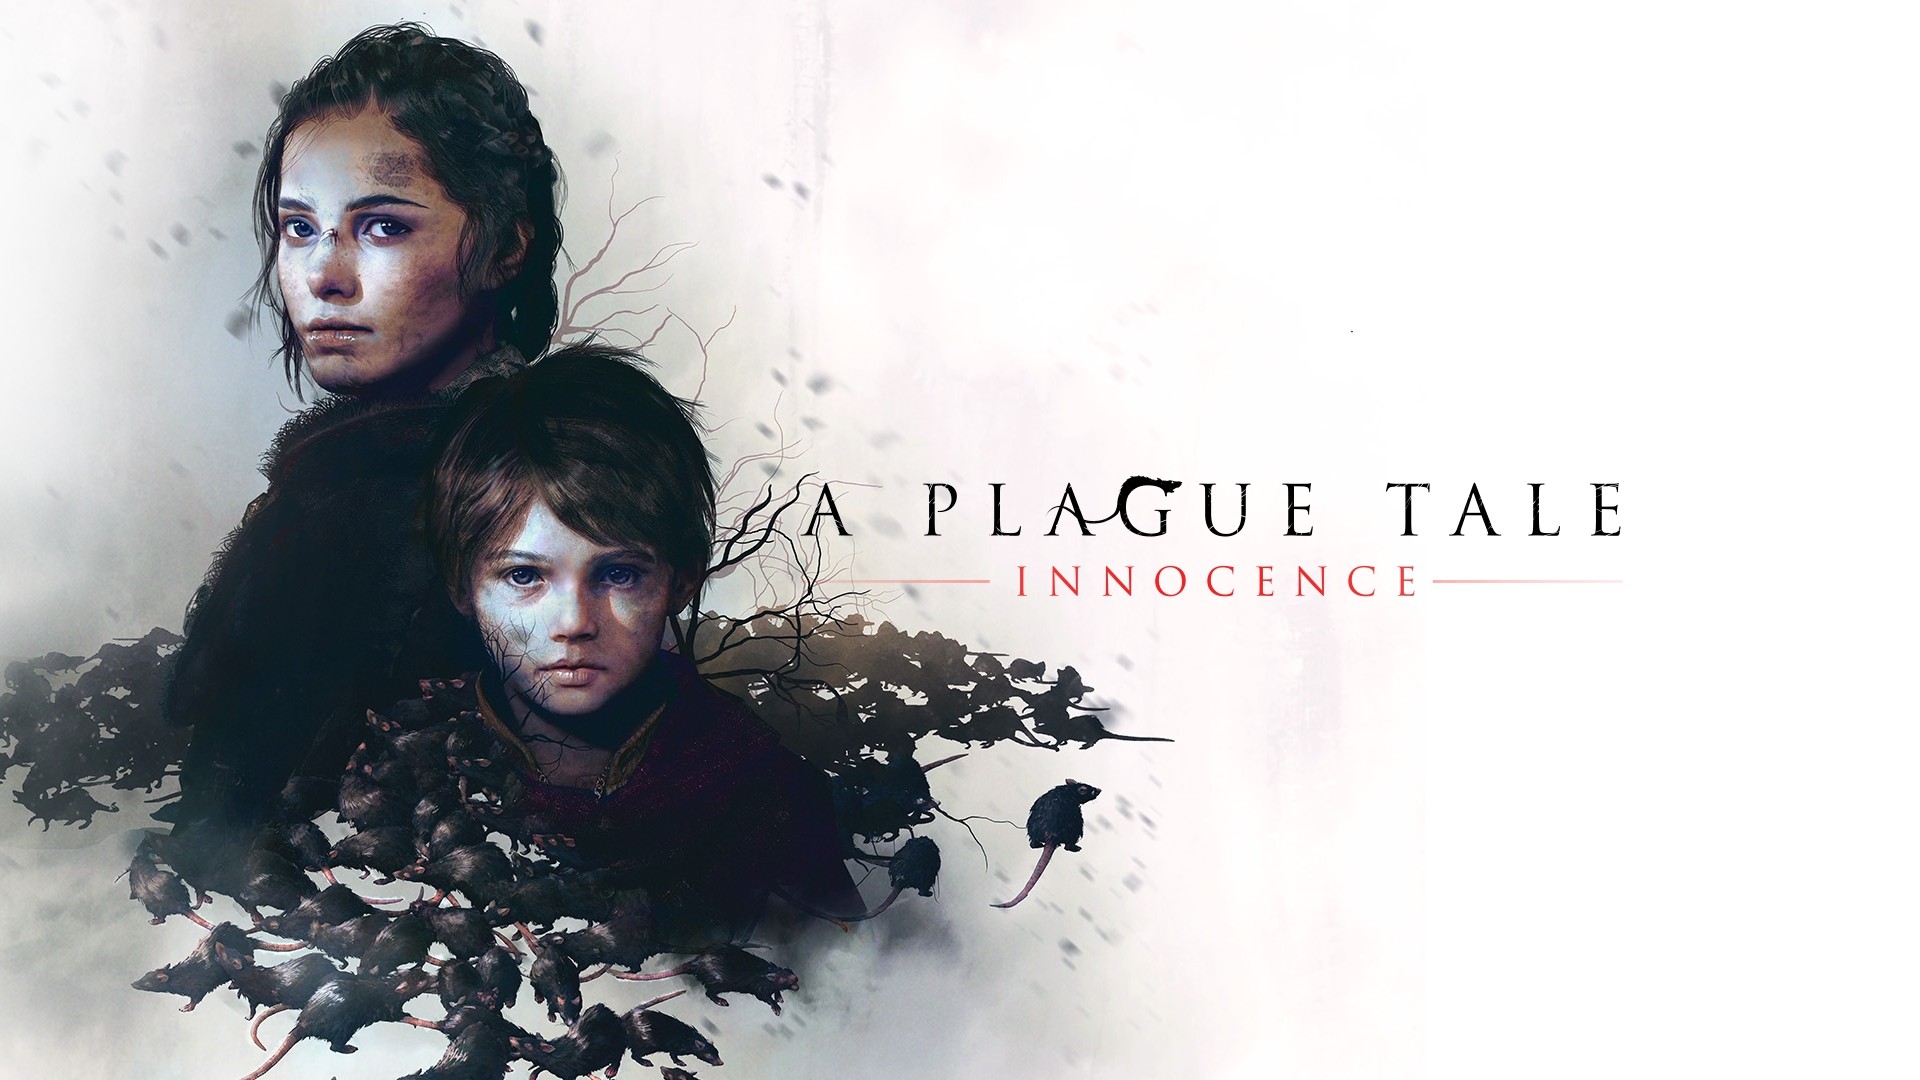 A Plague Tale: Innocence. This indie RPG is a great and eerie